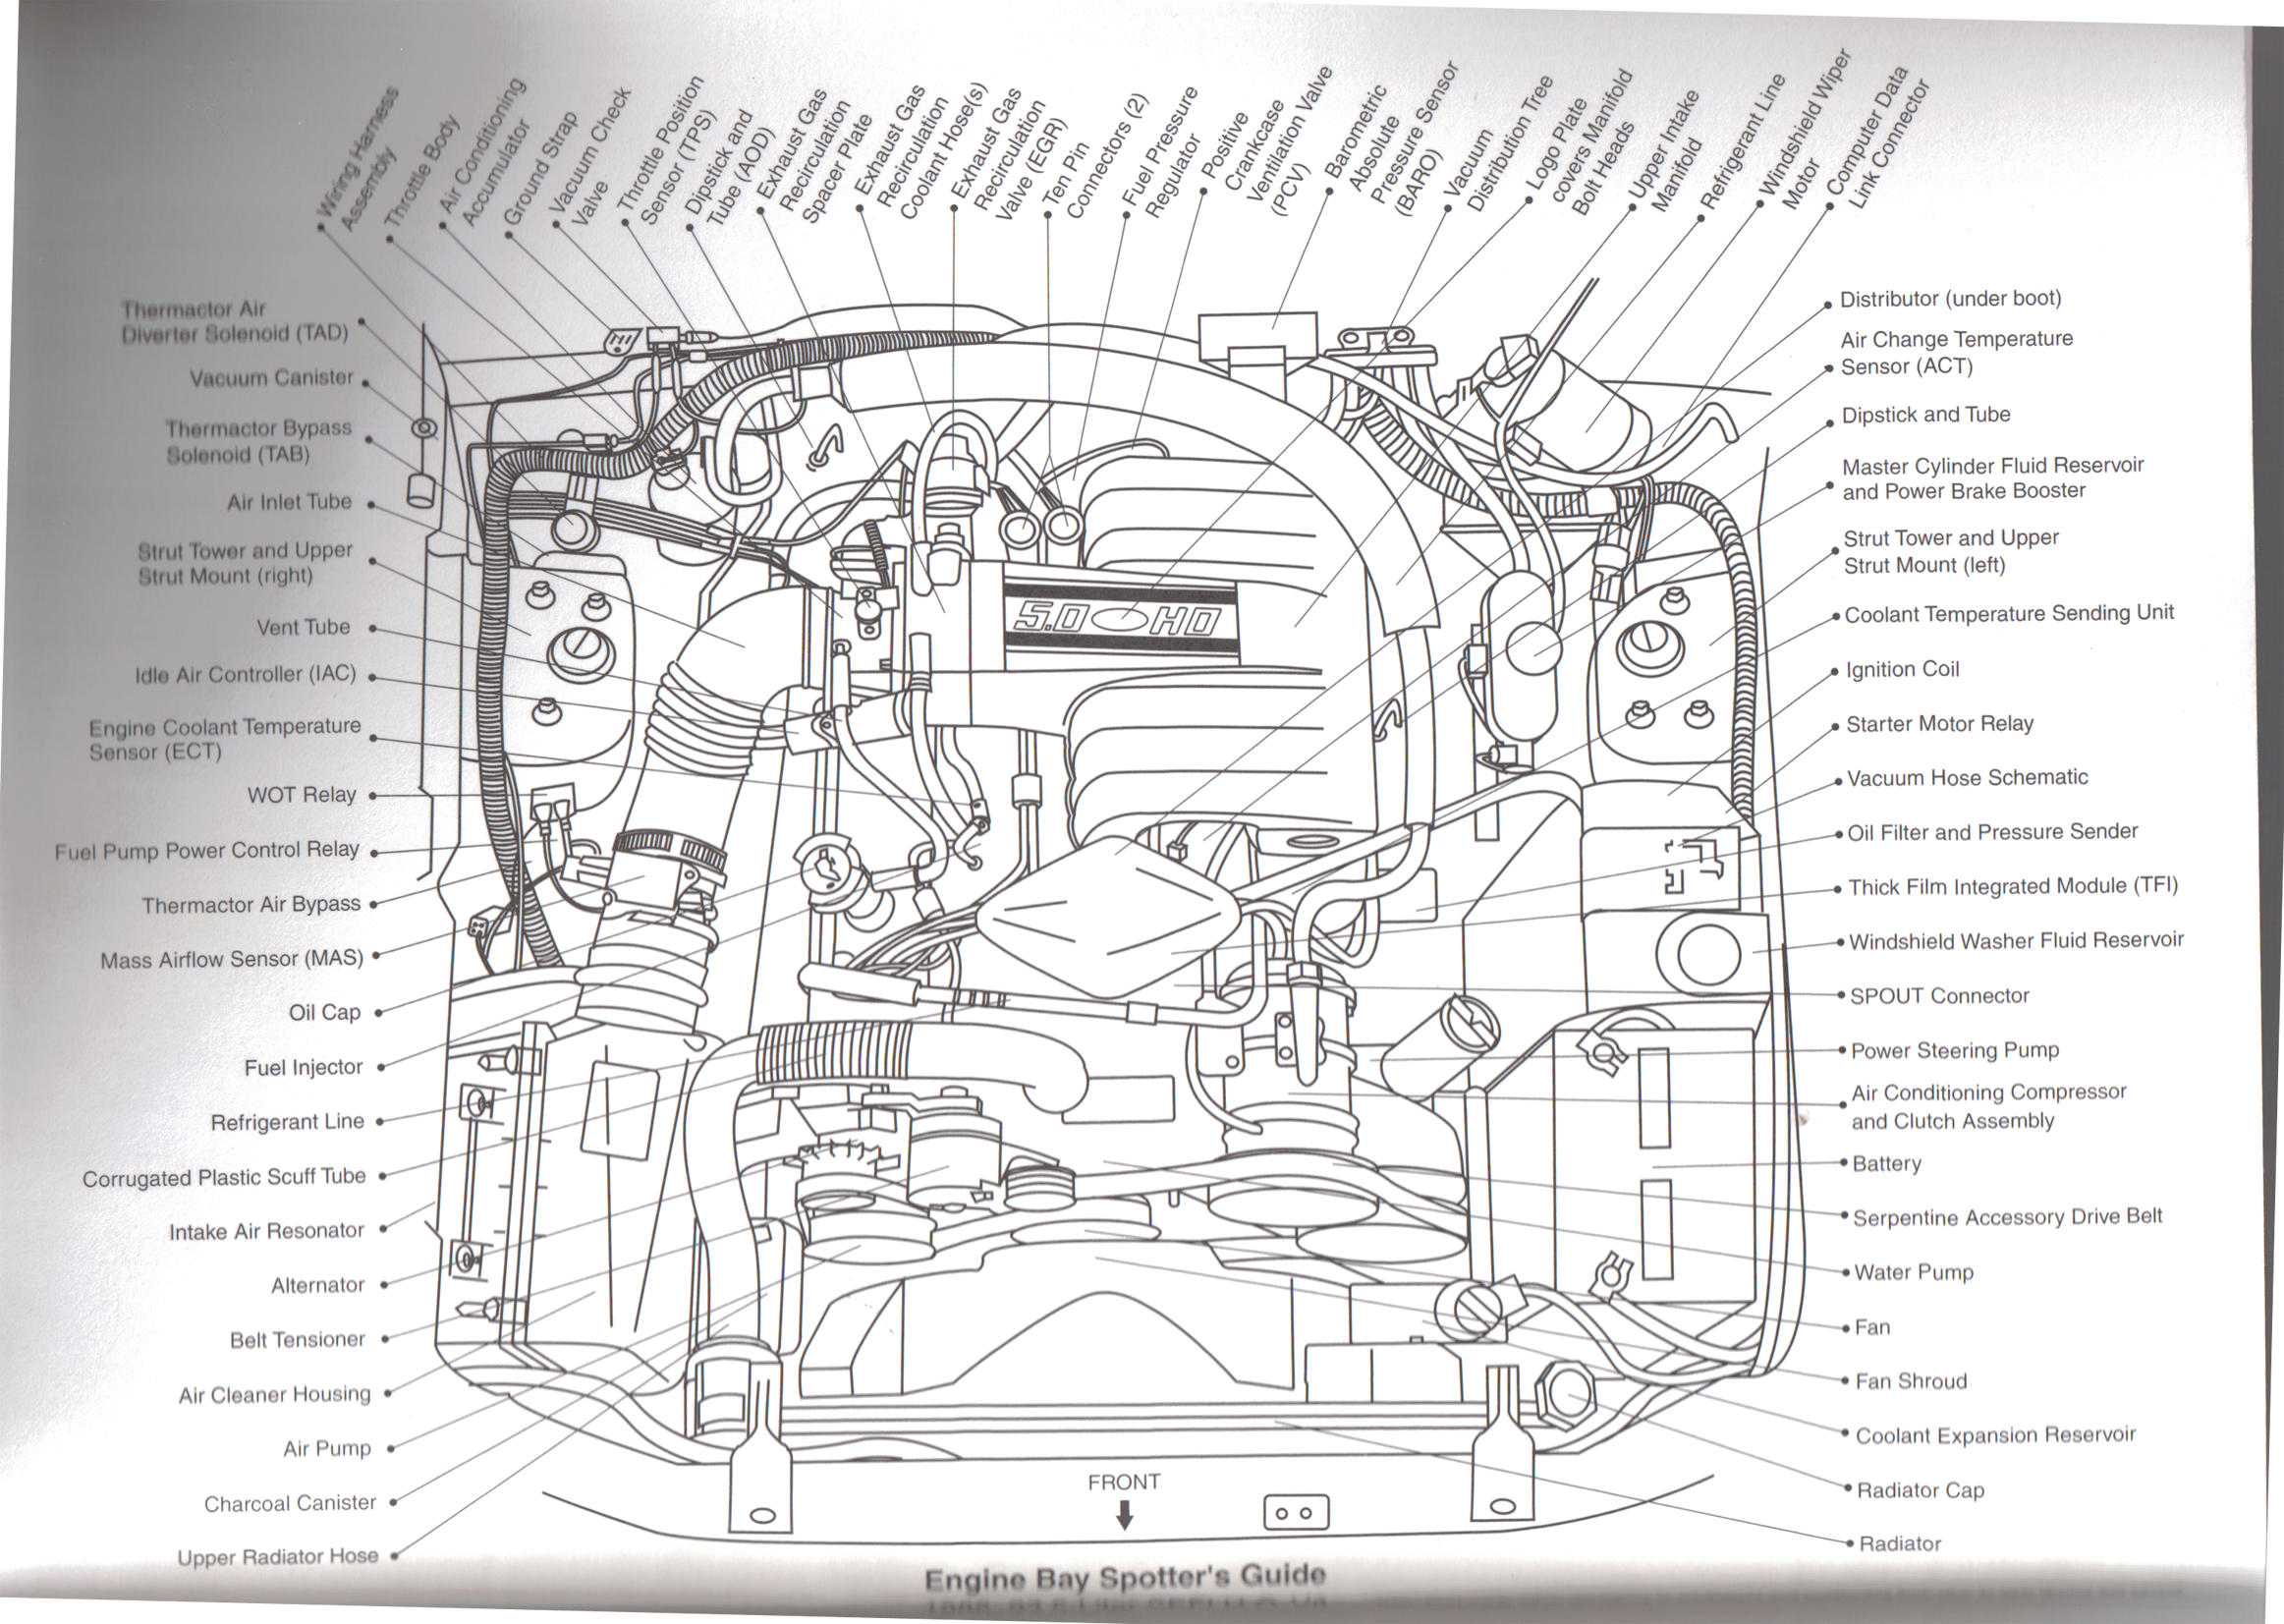 1991 Ford 5 0 Engine Diagram - More Wiring Diagrams Bound